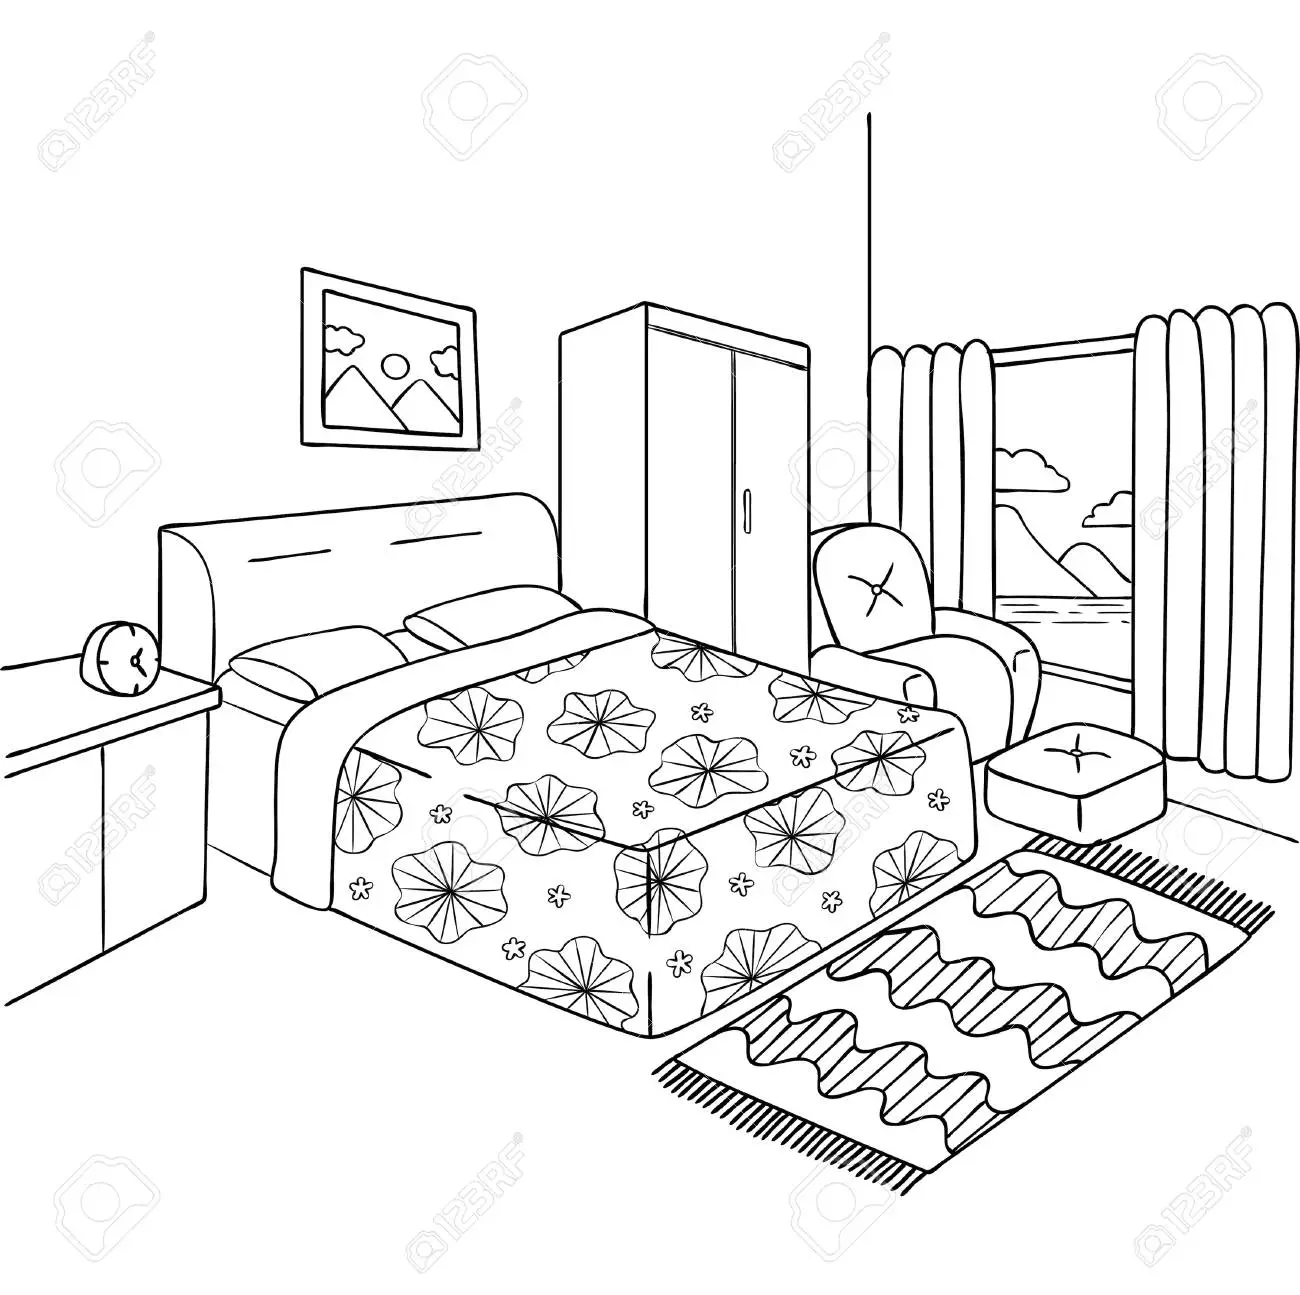 Bedroom Coloring Pages 1